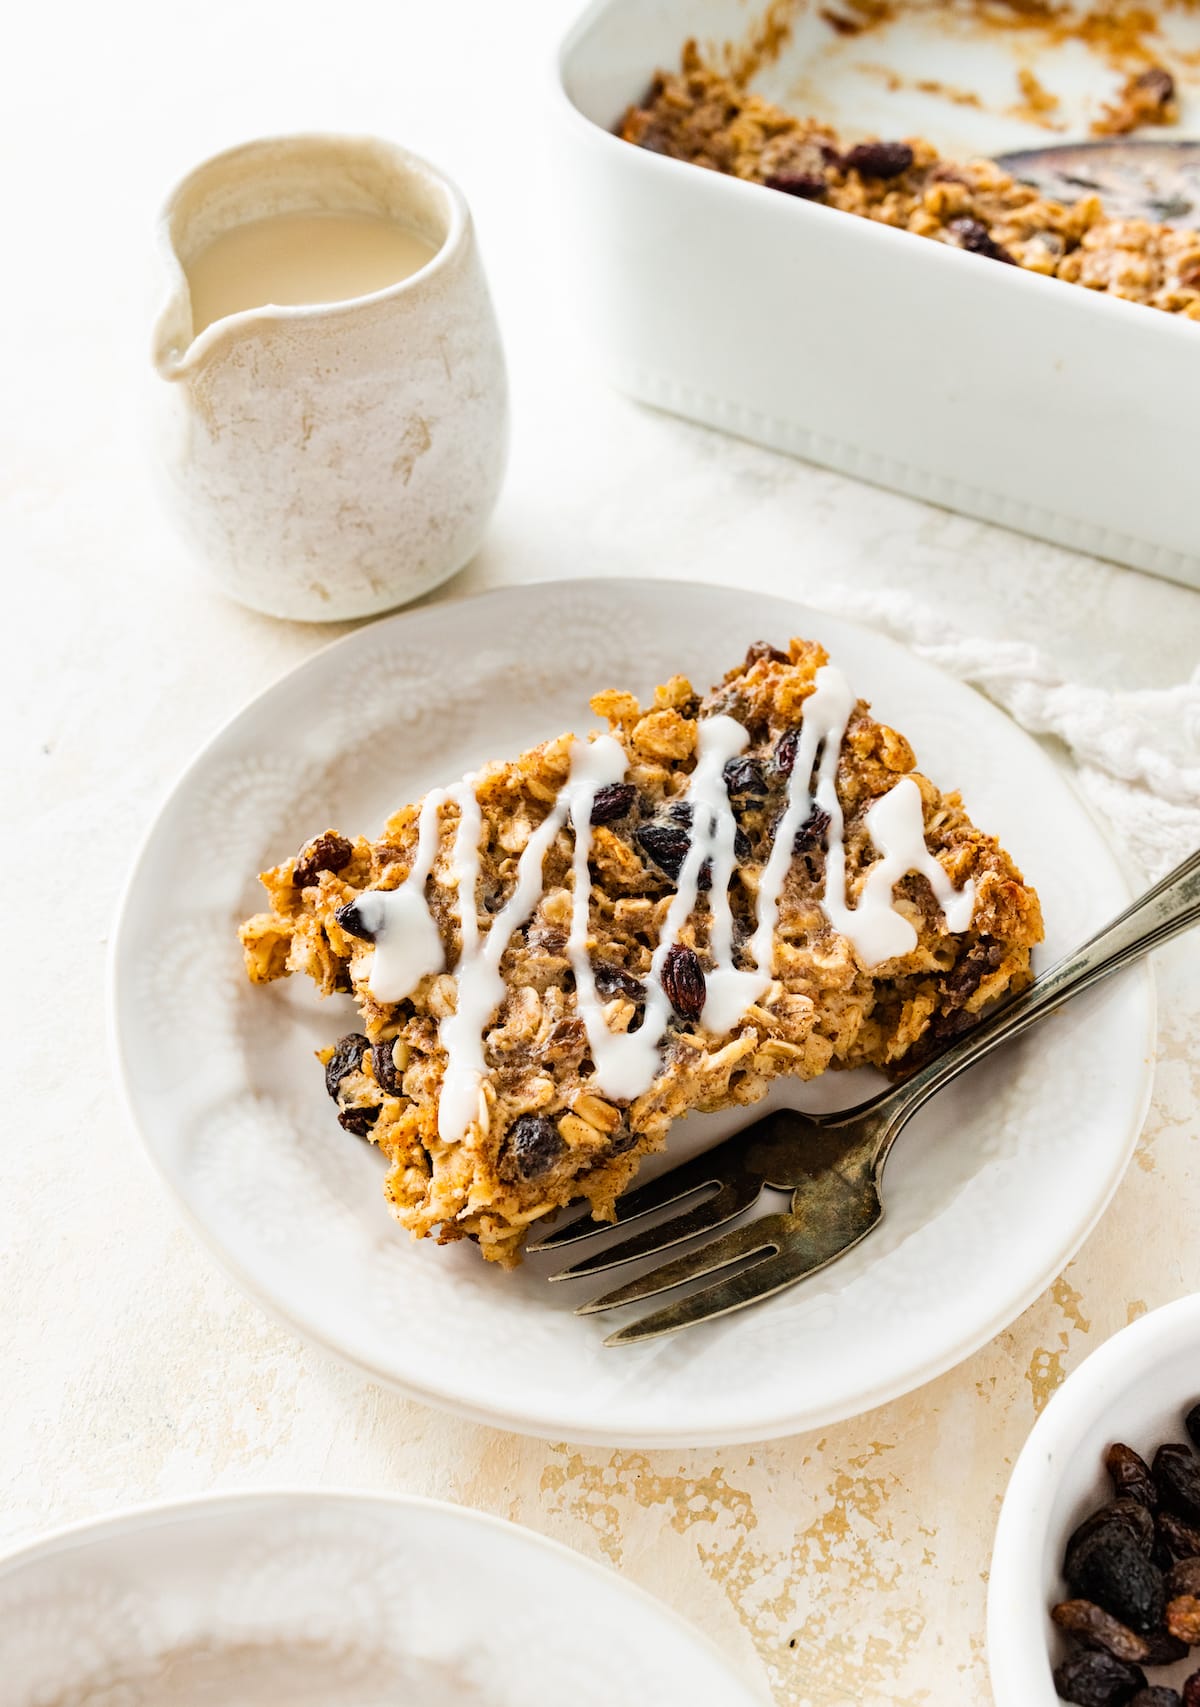 A serving of cinnamon raisin baked oatmeal on a small plate with a drizzle of coconut butter on top.